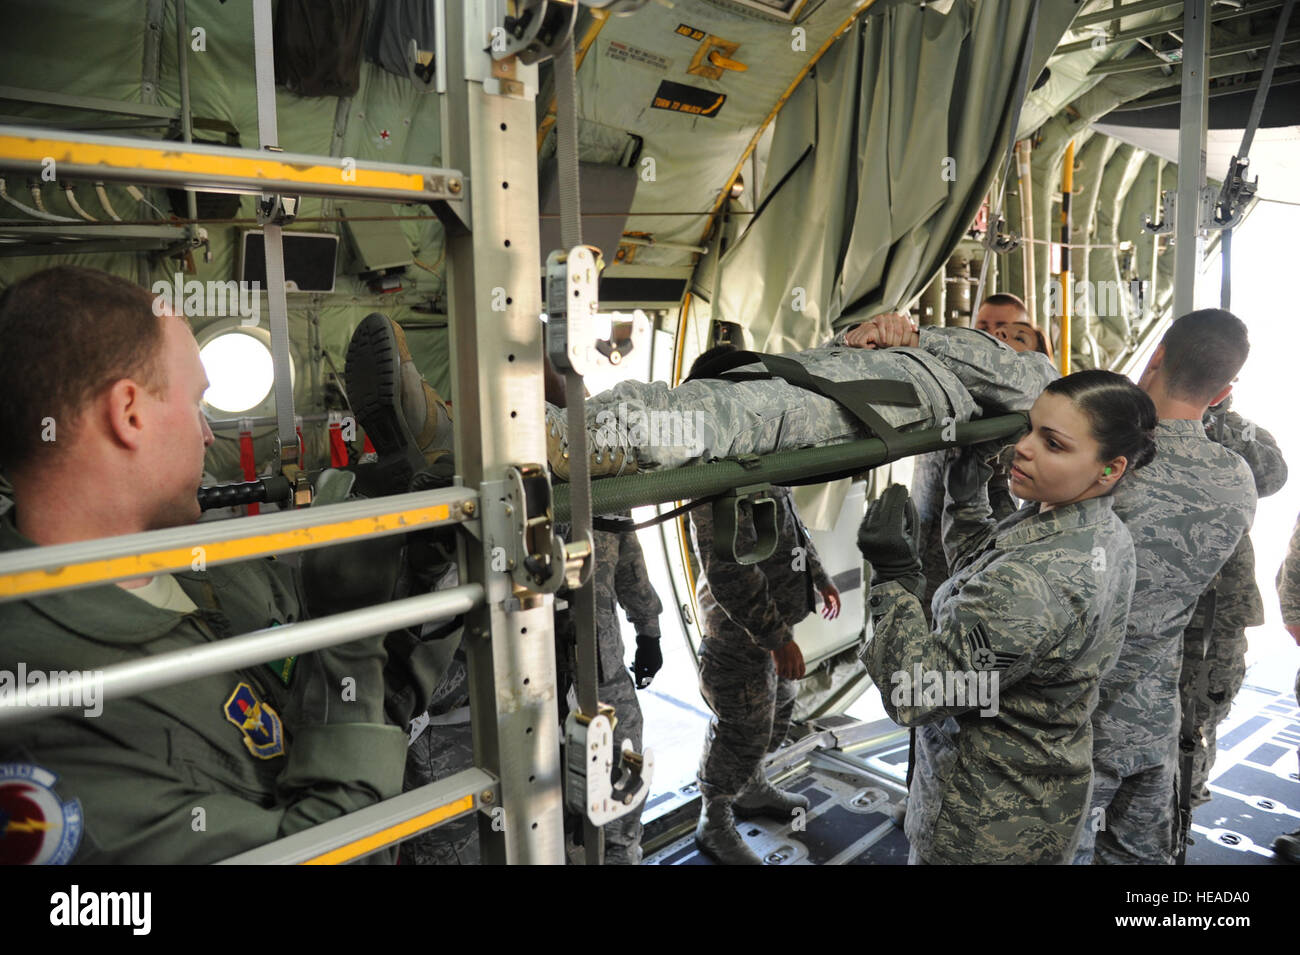 U.S. Air Force Senior Airman Ashley Figueroa, right foreground, with the 81st Aerospace Medicine Squadron (AMDS), helps other members of the 81st Medical Group members as they secure Lt. Col. Mikelle Maddox, a physician with the 81st AMDS role-playing as a patient, aboard a C-130 Hercules aircraft during air evacuation training March 14, 2013, at Keesler Air Force Base, Miss. The training was intended to provide experience in configuring C-130s for patient transport. Airmen with the 81st MDG, 81st AMDS, 81st Medical Operations Squadron and 53rd Weather Reconnaissance Squadron took part in the  Stock Photo